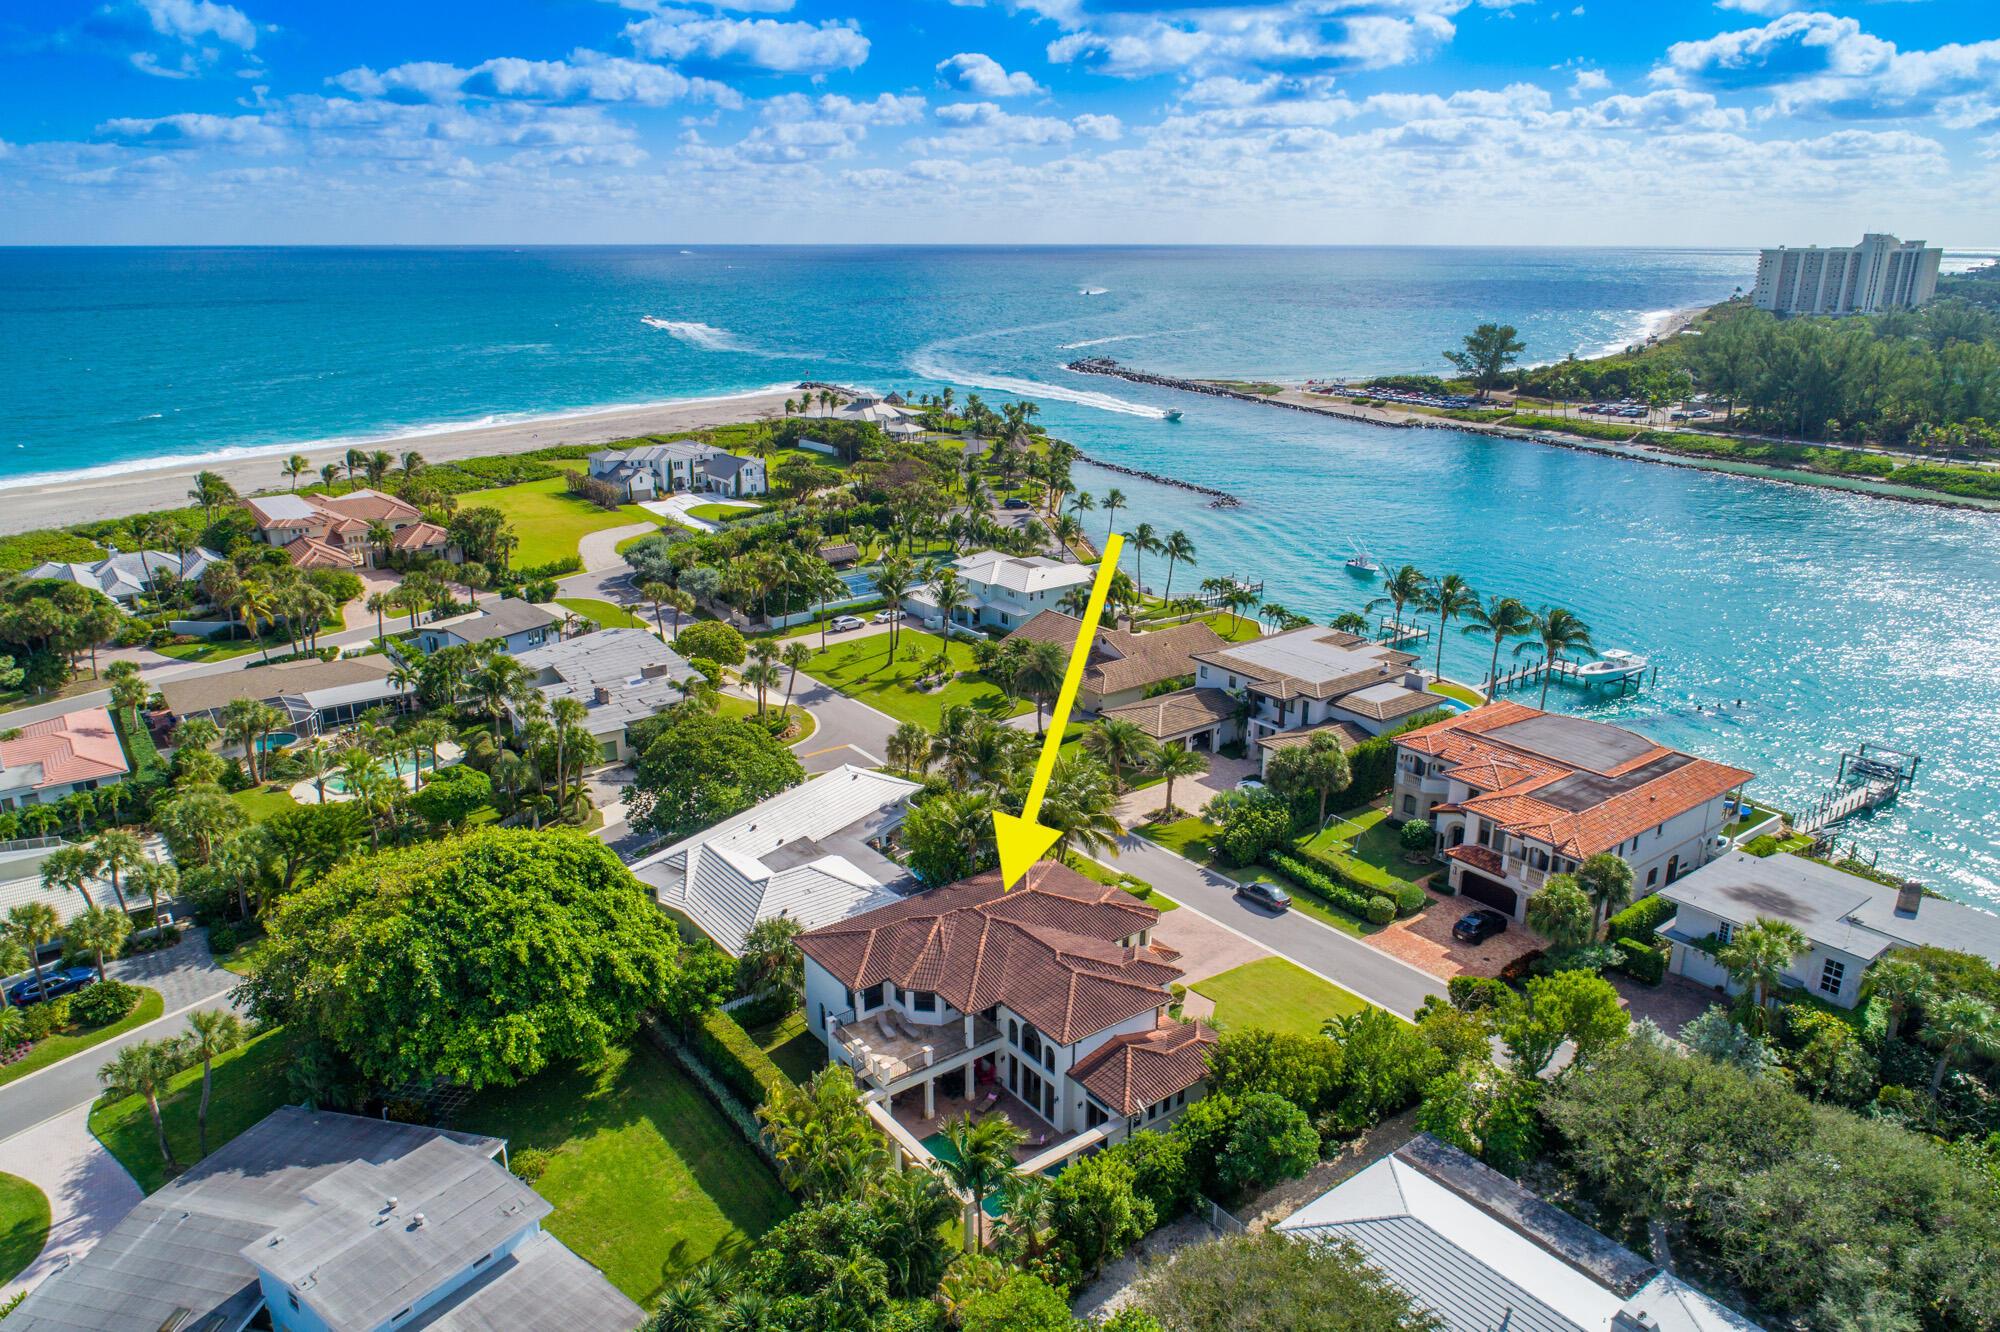 Location, location, location, this is one of the largest interior homes that can be built in the neighborhood. Highly sought after location and size. Welcome to this stunning Mediterranean-style coastal residence located in the highly-sought after Jupiter Inlet Colony. Enjoy being steps away from the private Beach Club, the Jupiter Inlet & the gorgeous turquoise ocean waters! Custom built in 2007, this magnificent 5 BD/5.5 BA concrete home with impact windows & doors was impeccably constructed with the finest design, craftsmanship, and functionality in mind. Enter this elegantly designed home and marvel at the abundance of natural light, arched windows, trey ceilings, marble and hardwood floors, custom woodwork, and much much more! The gourmet kitchen features top-of-the-line... ... and a large balcony boasting views of the inlet and Intracoastal, is a serene retreat within the home.  This prime location offers easy access to the beautiful beaches, marinas, and world-class golf courses that the Jupiter area is renowned for. This exclusive community with the area's only private beach club provides 24/7 security, ensuring your peace of mind. Don't miss the opportunity to make this exceptional property your own!